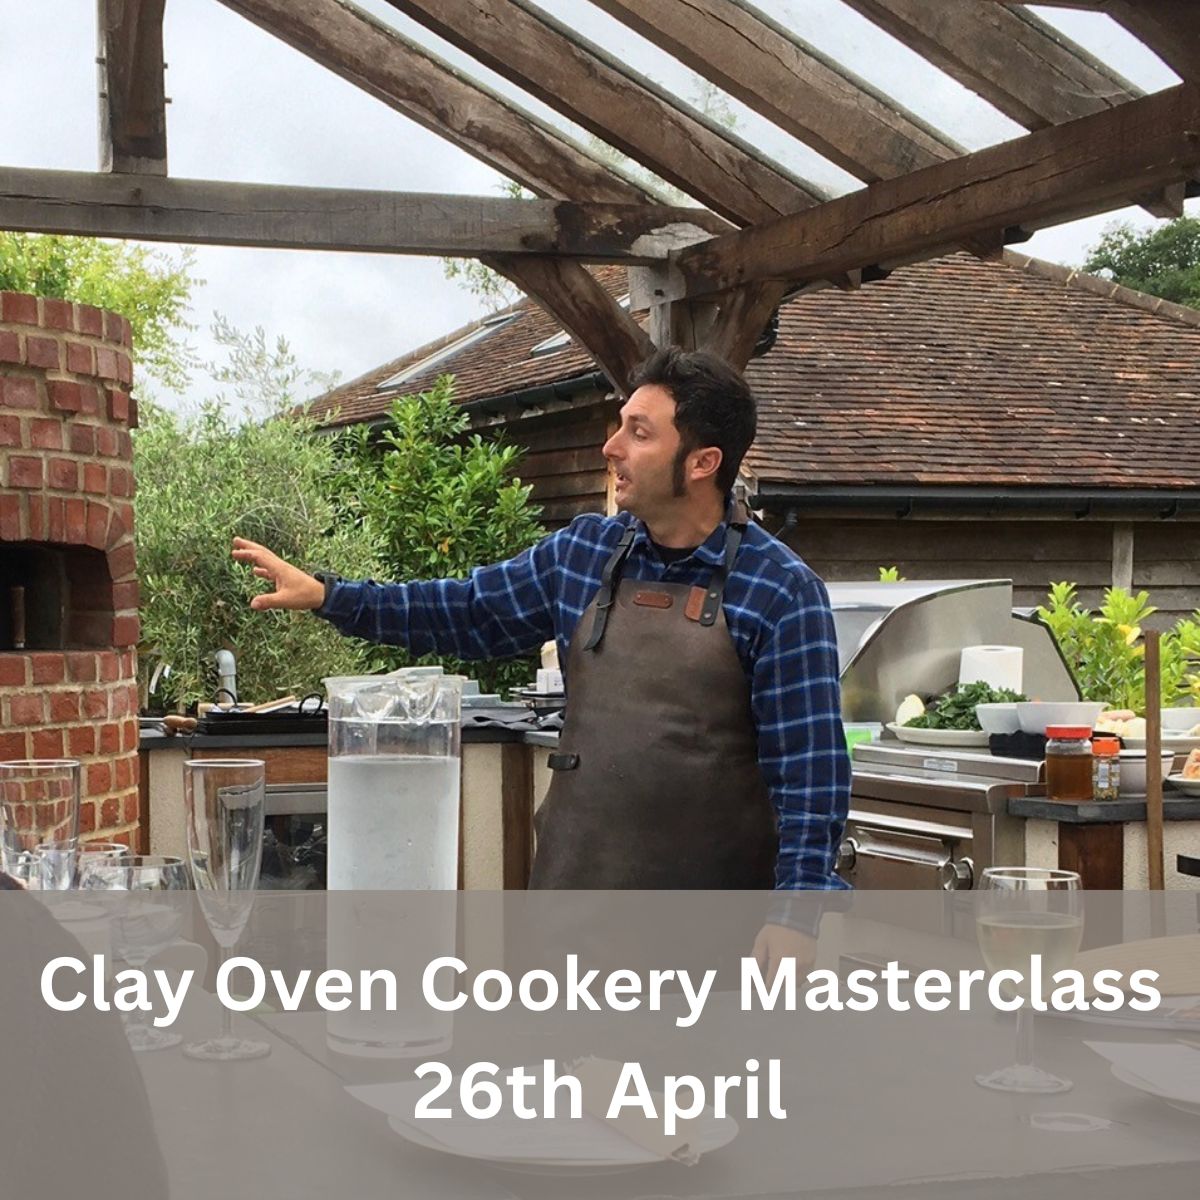 Clay oven cookery masterclass